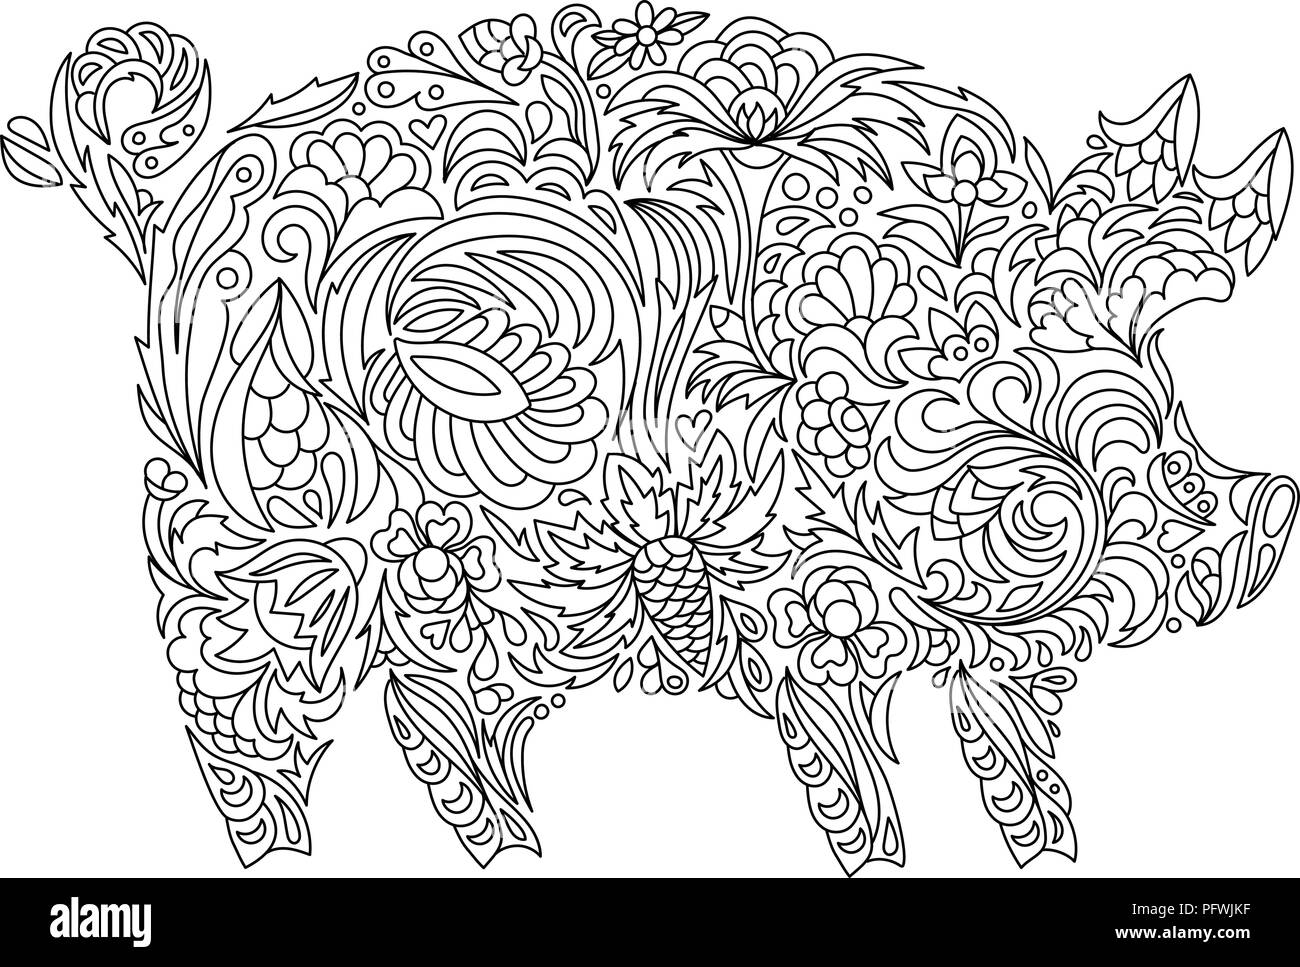 Drawing zentangle pig for coloring book for adult or other decorations Stock Vector